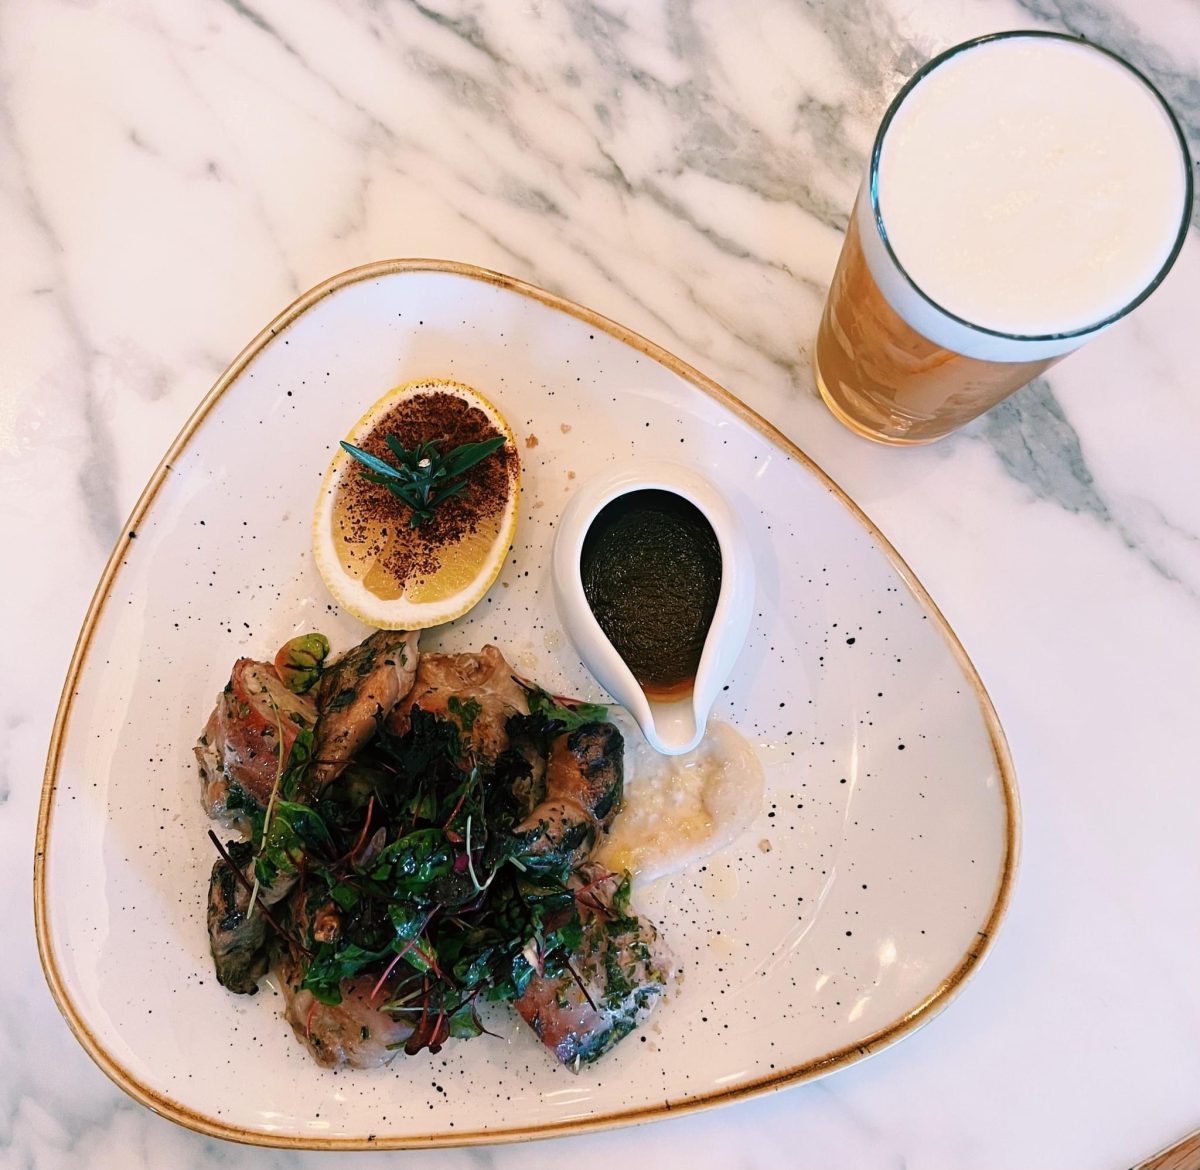 Quail dish with beer